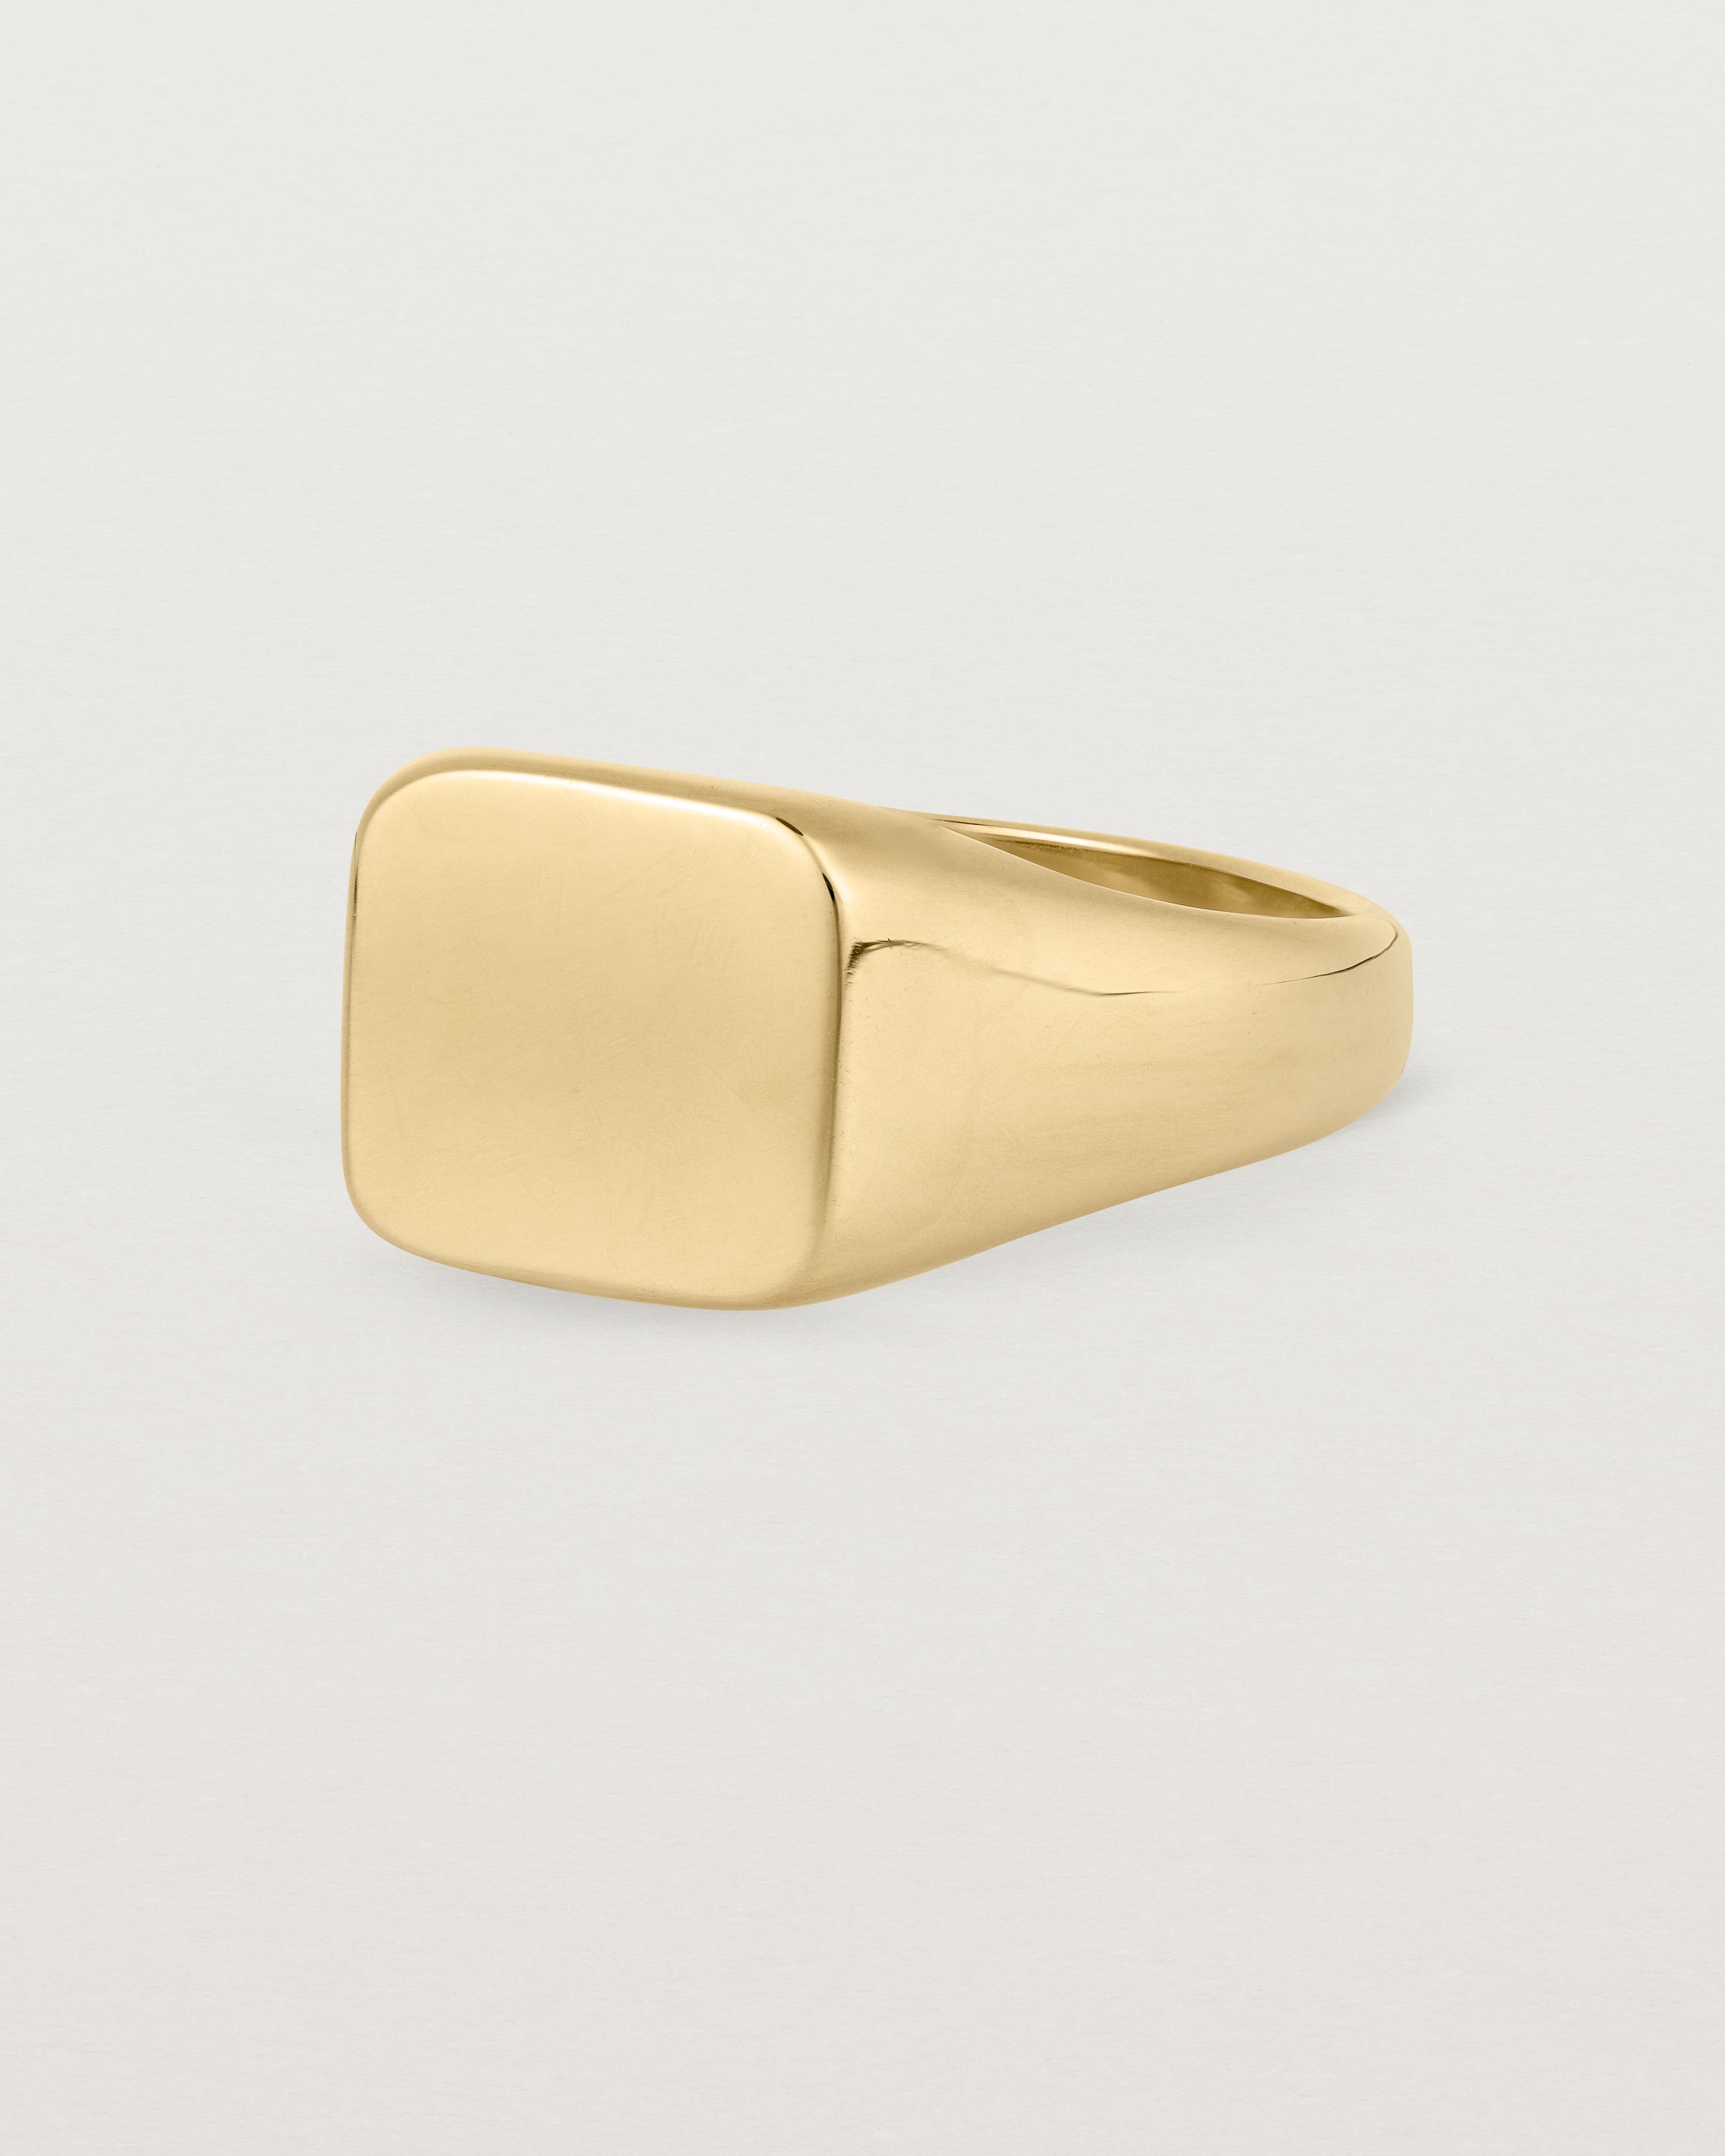 Angled view of the Sempré Signet Ring in Yellow Gold.